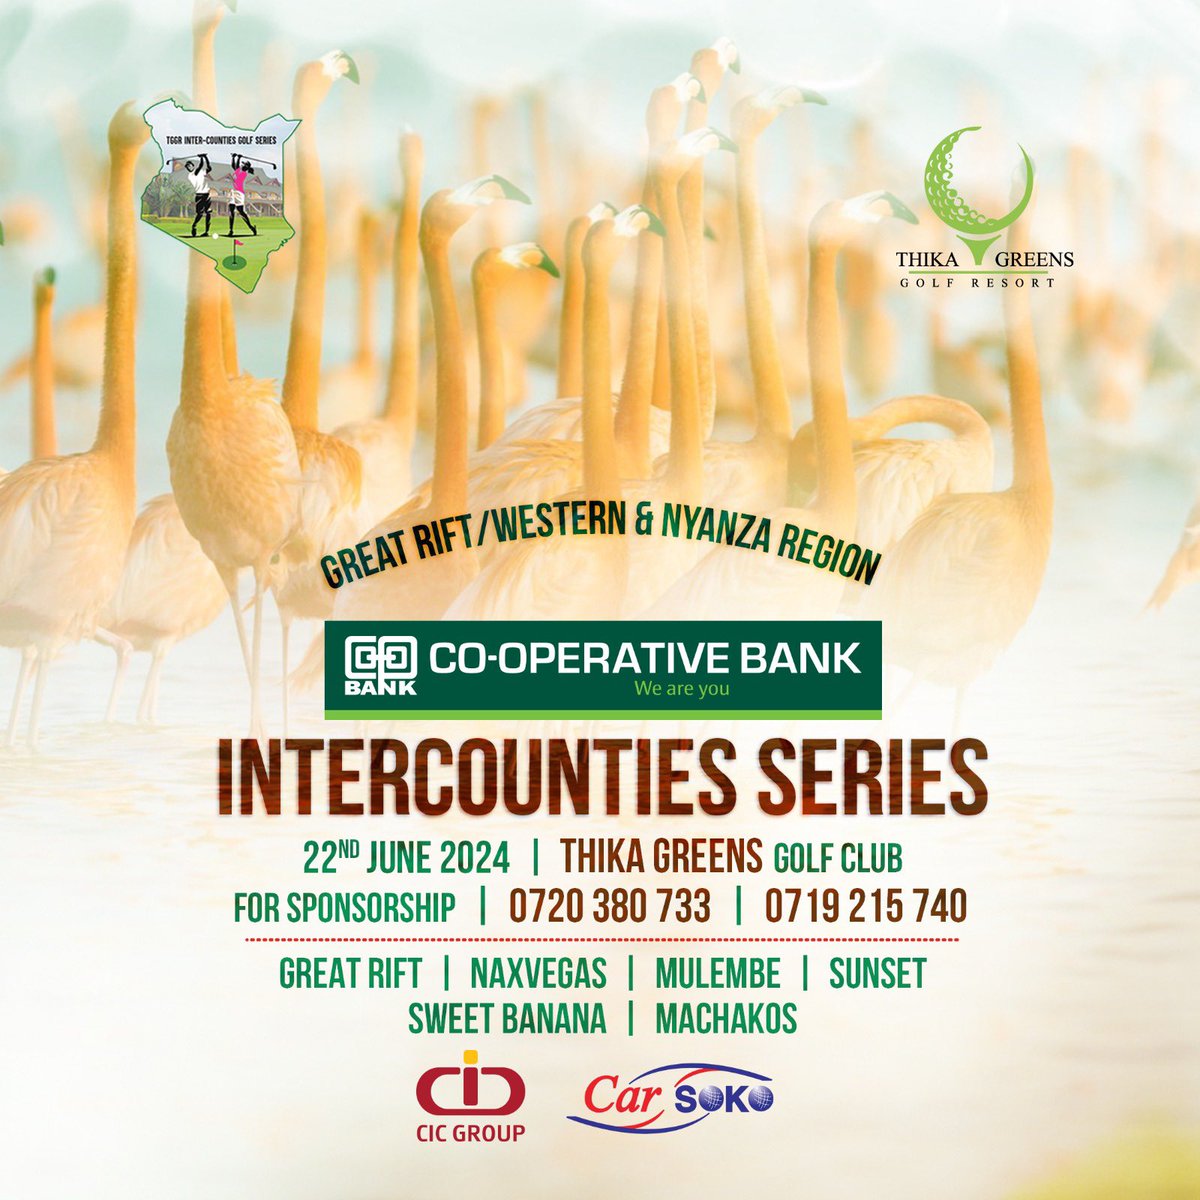 🏌️‍♂️Join us for the Inter-County Golf Series and test your skills against top players from across rift valley and western region. Swing into action and represent your county with pride! 🏆 

#GolfSeries #InterCountyChallenge #swingbig #thikagreens #thehiddengem